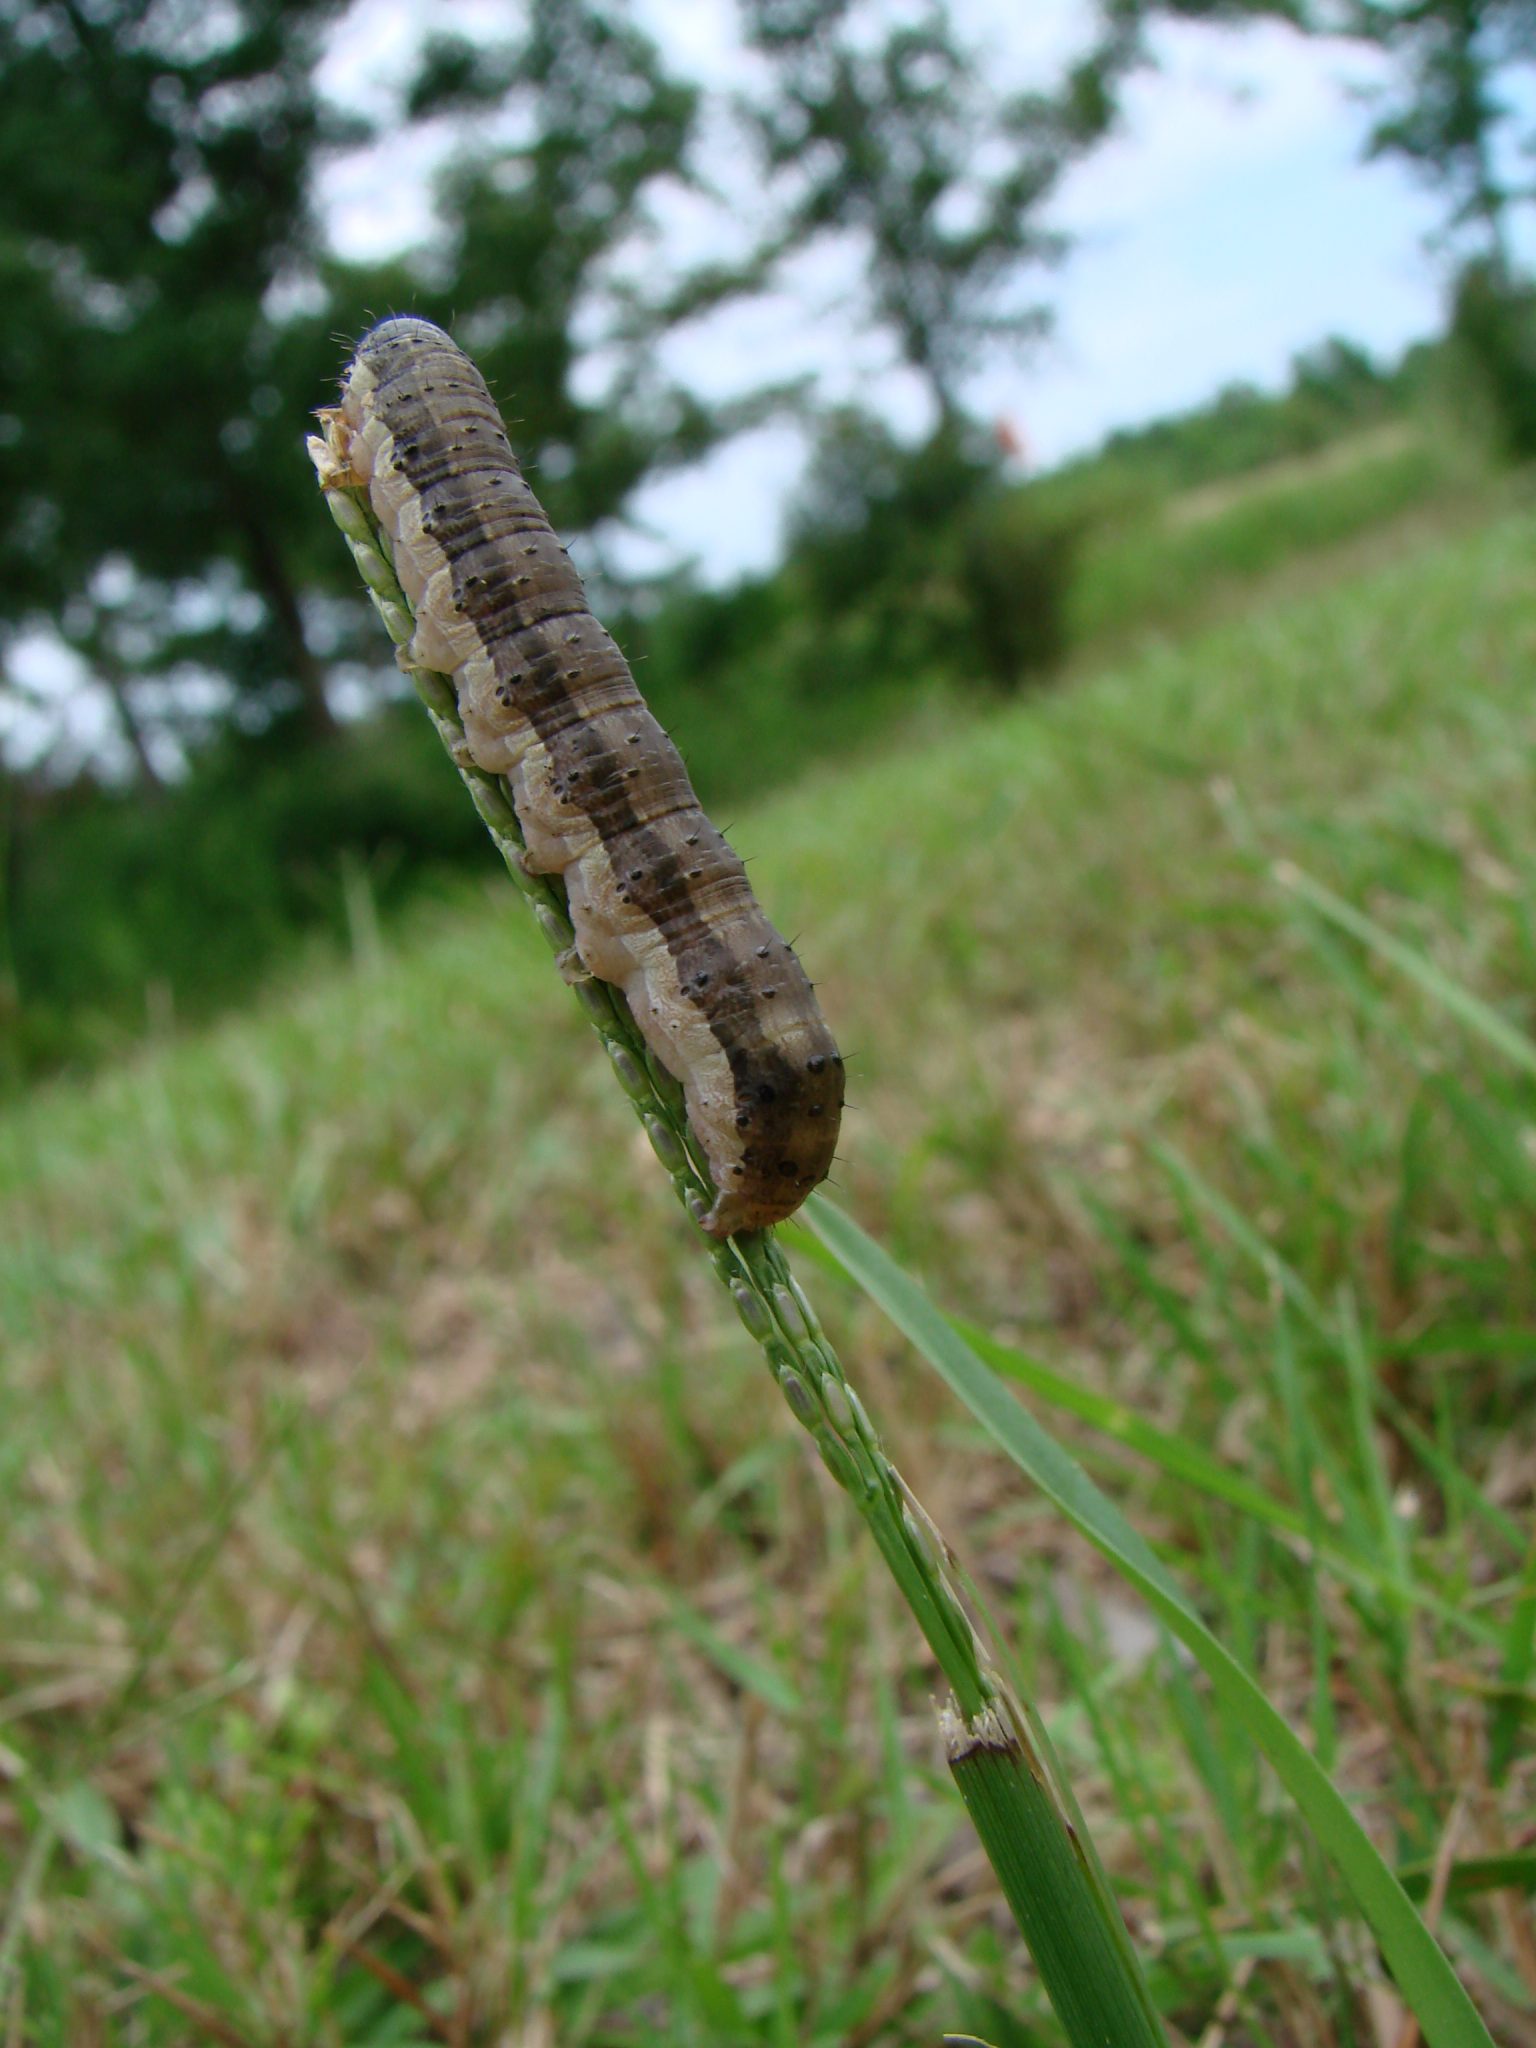 download army worms in lawn